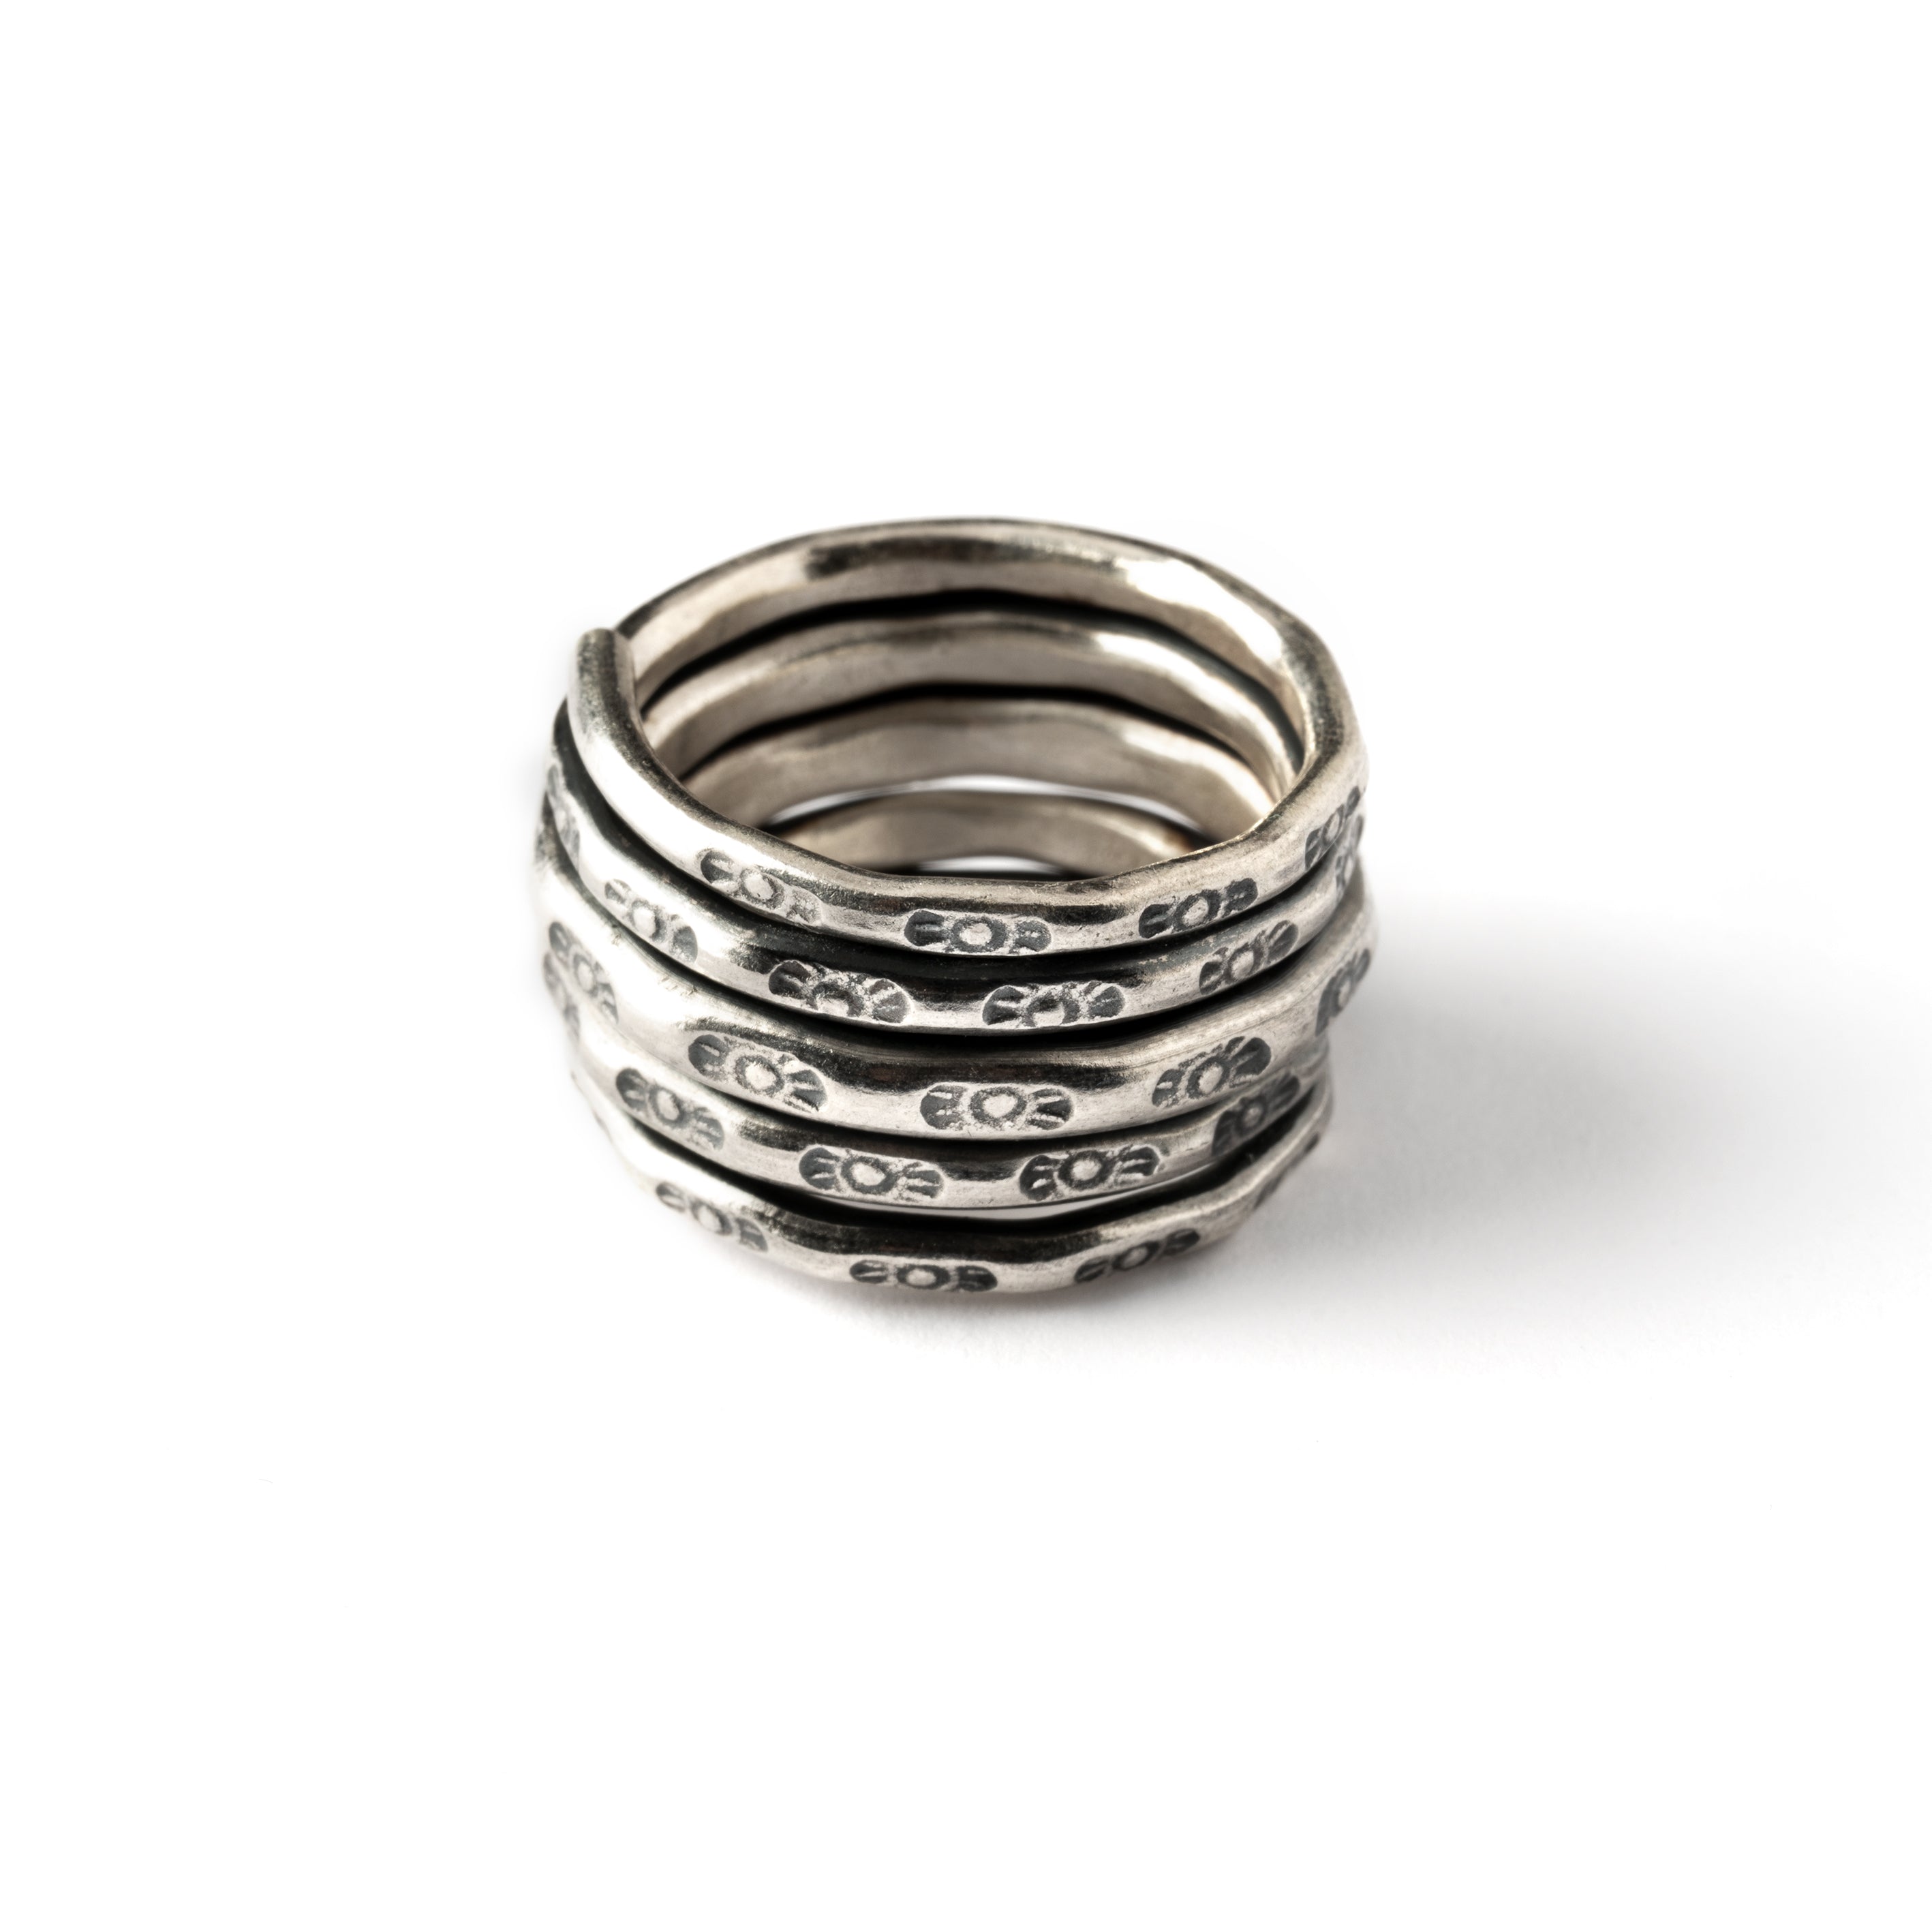 Tribal Silver Ring With Carving Decorations frontal view